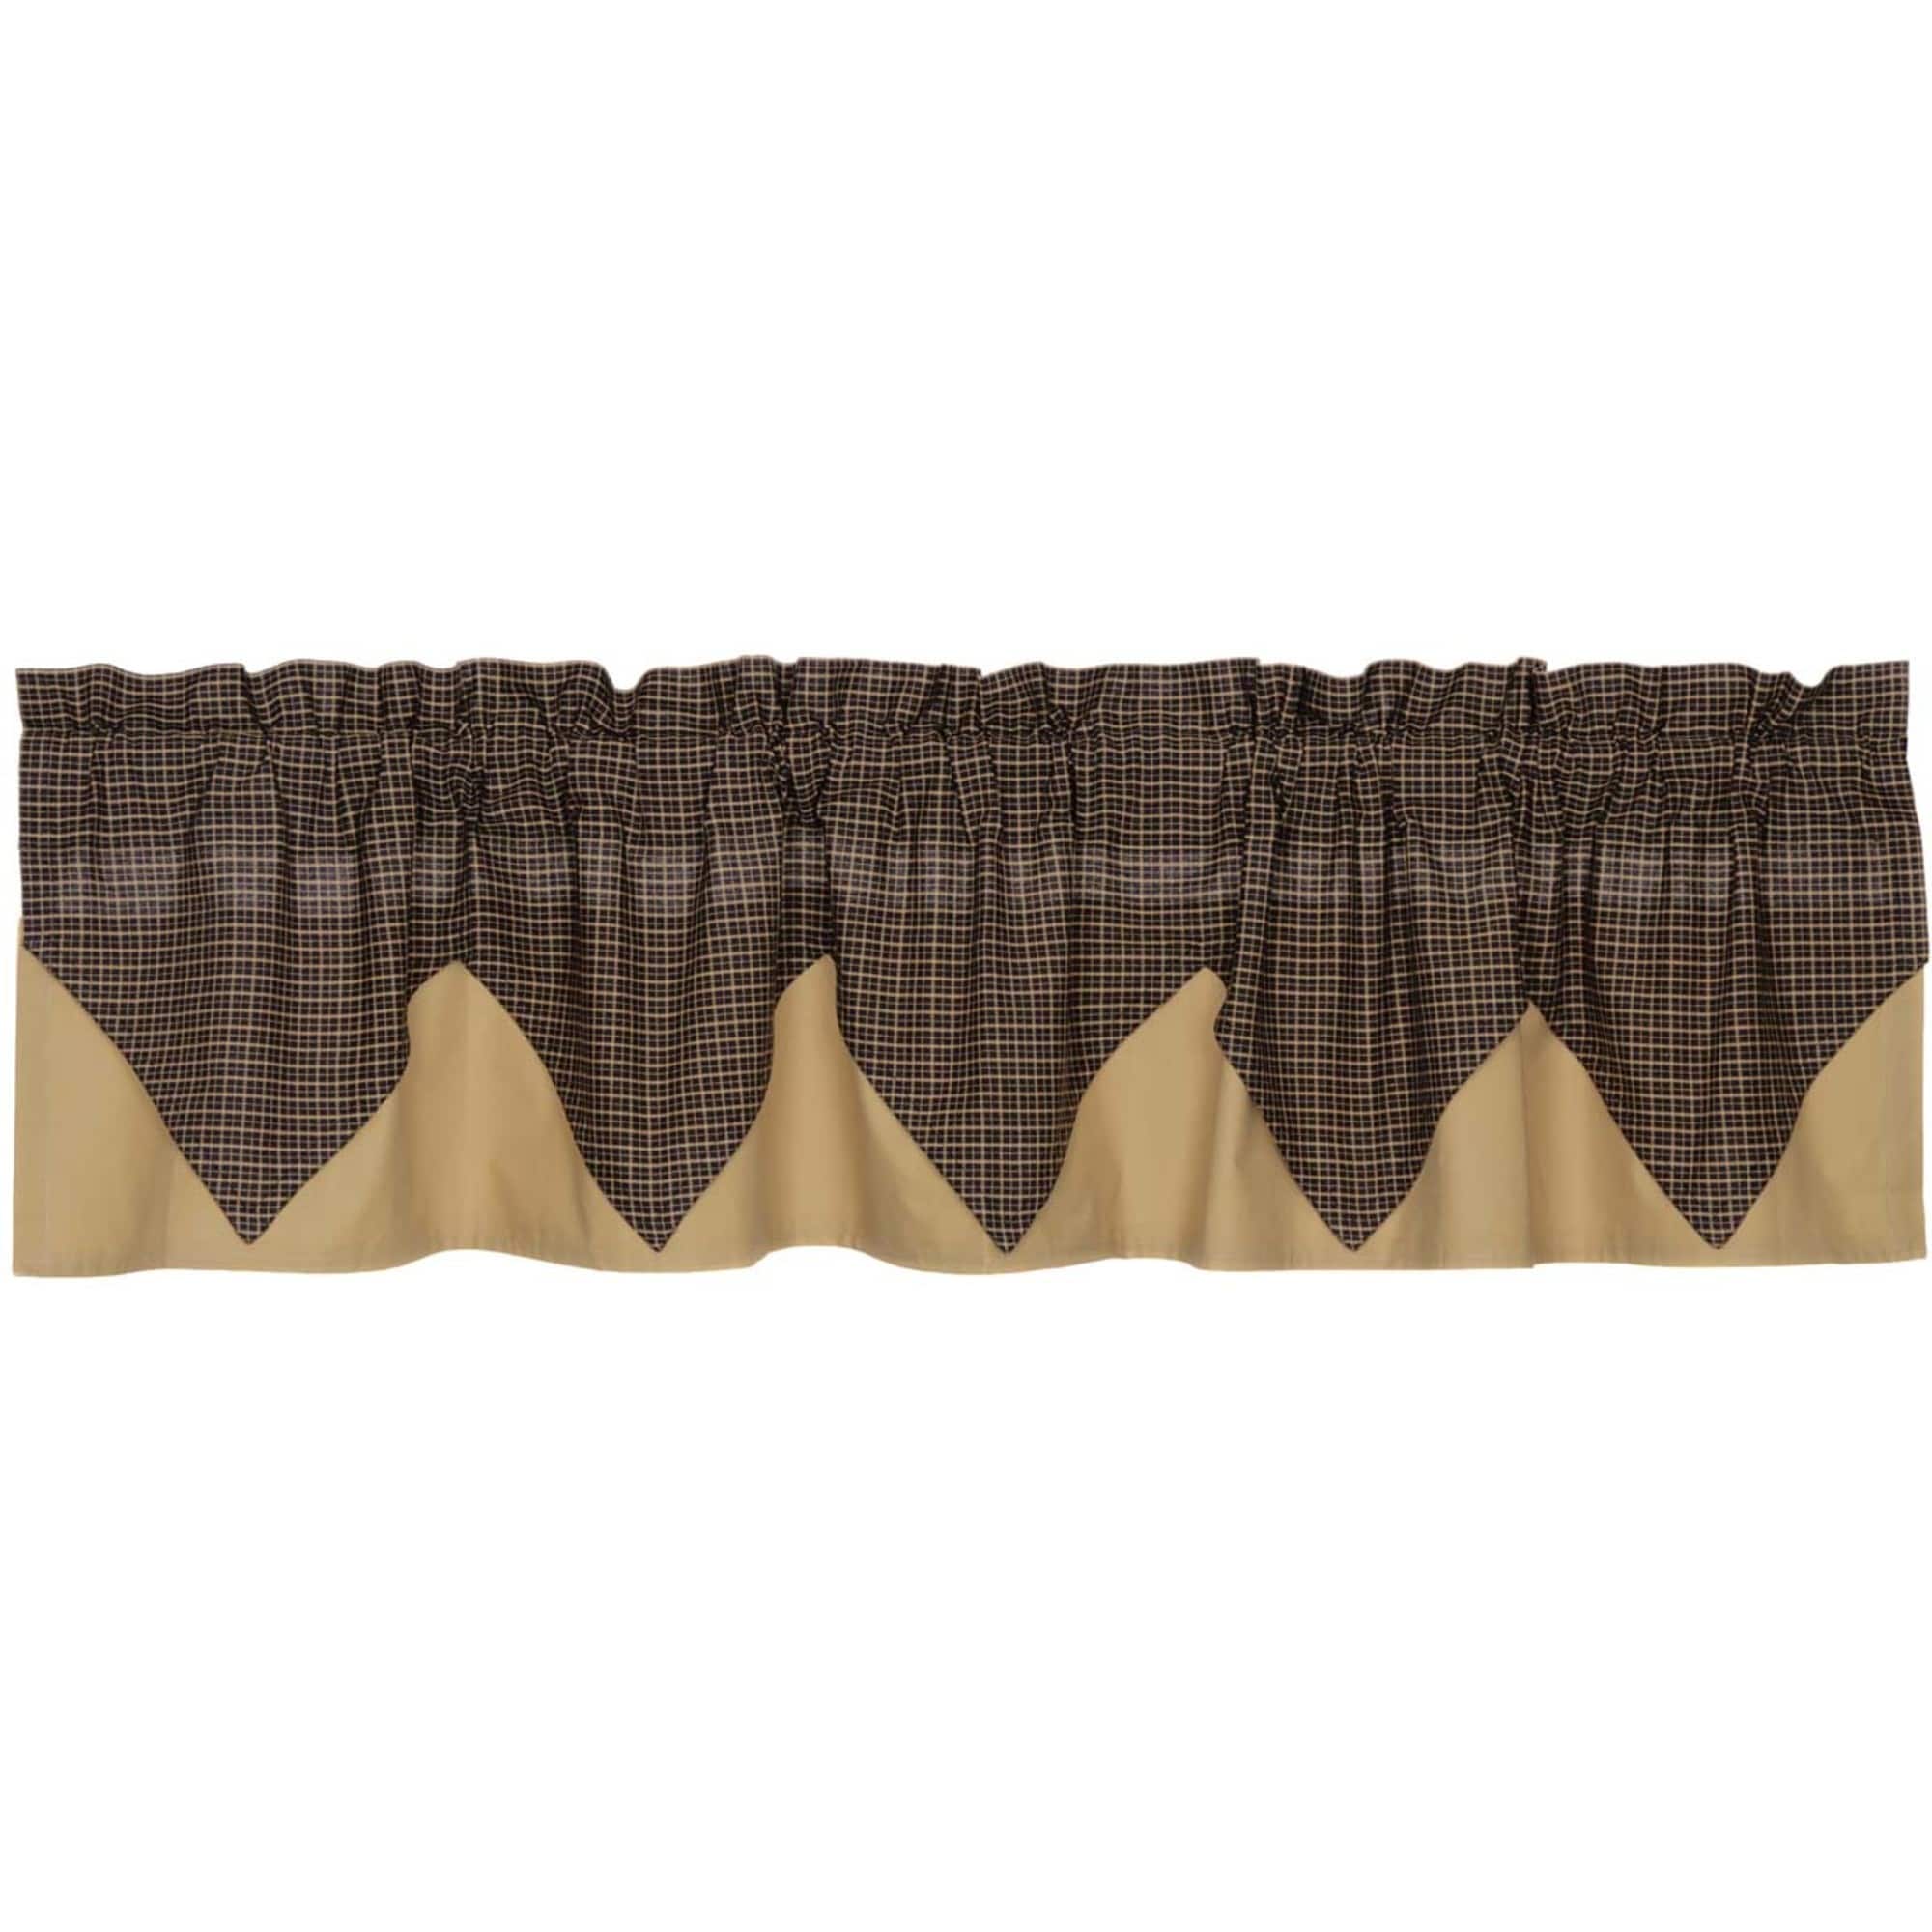 KETTLE GROVE Plaid Valance Layered Lined Primitive Black/Tan Check Rustic 16x72 